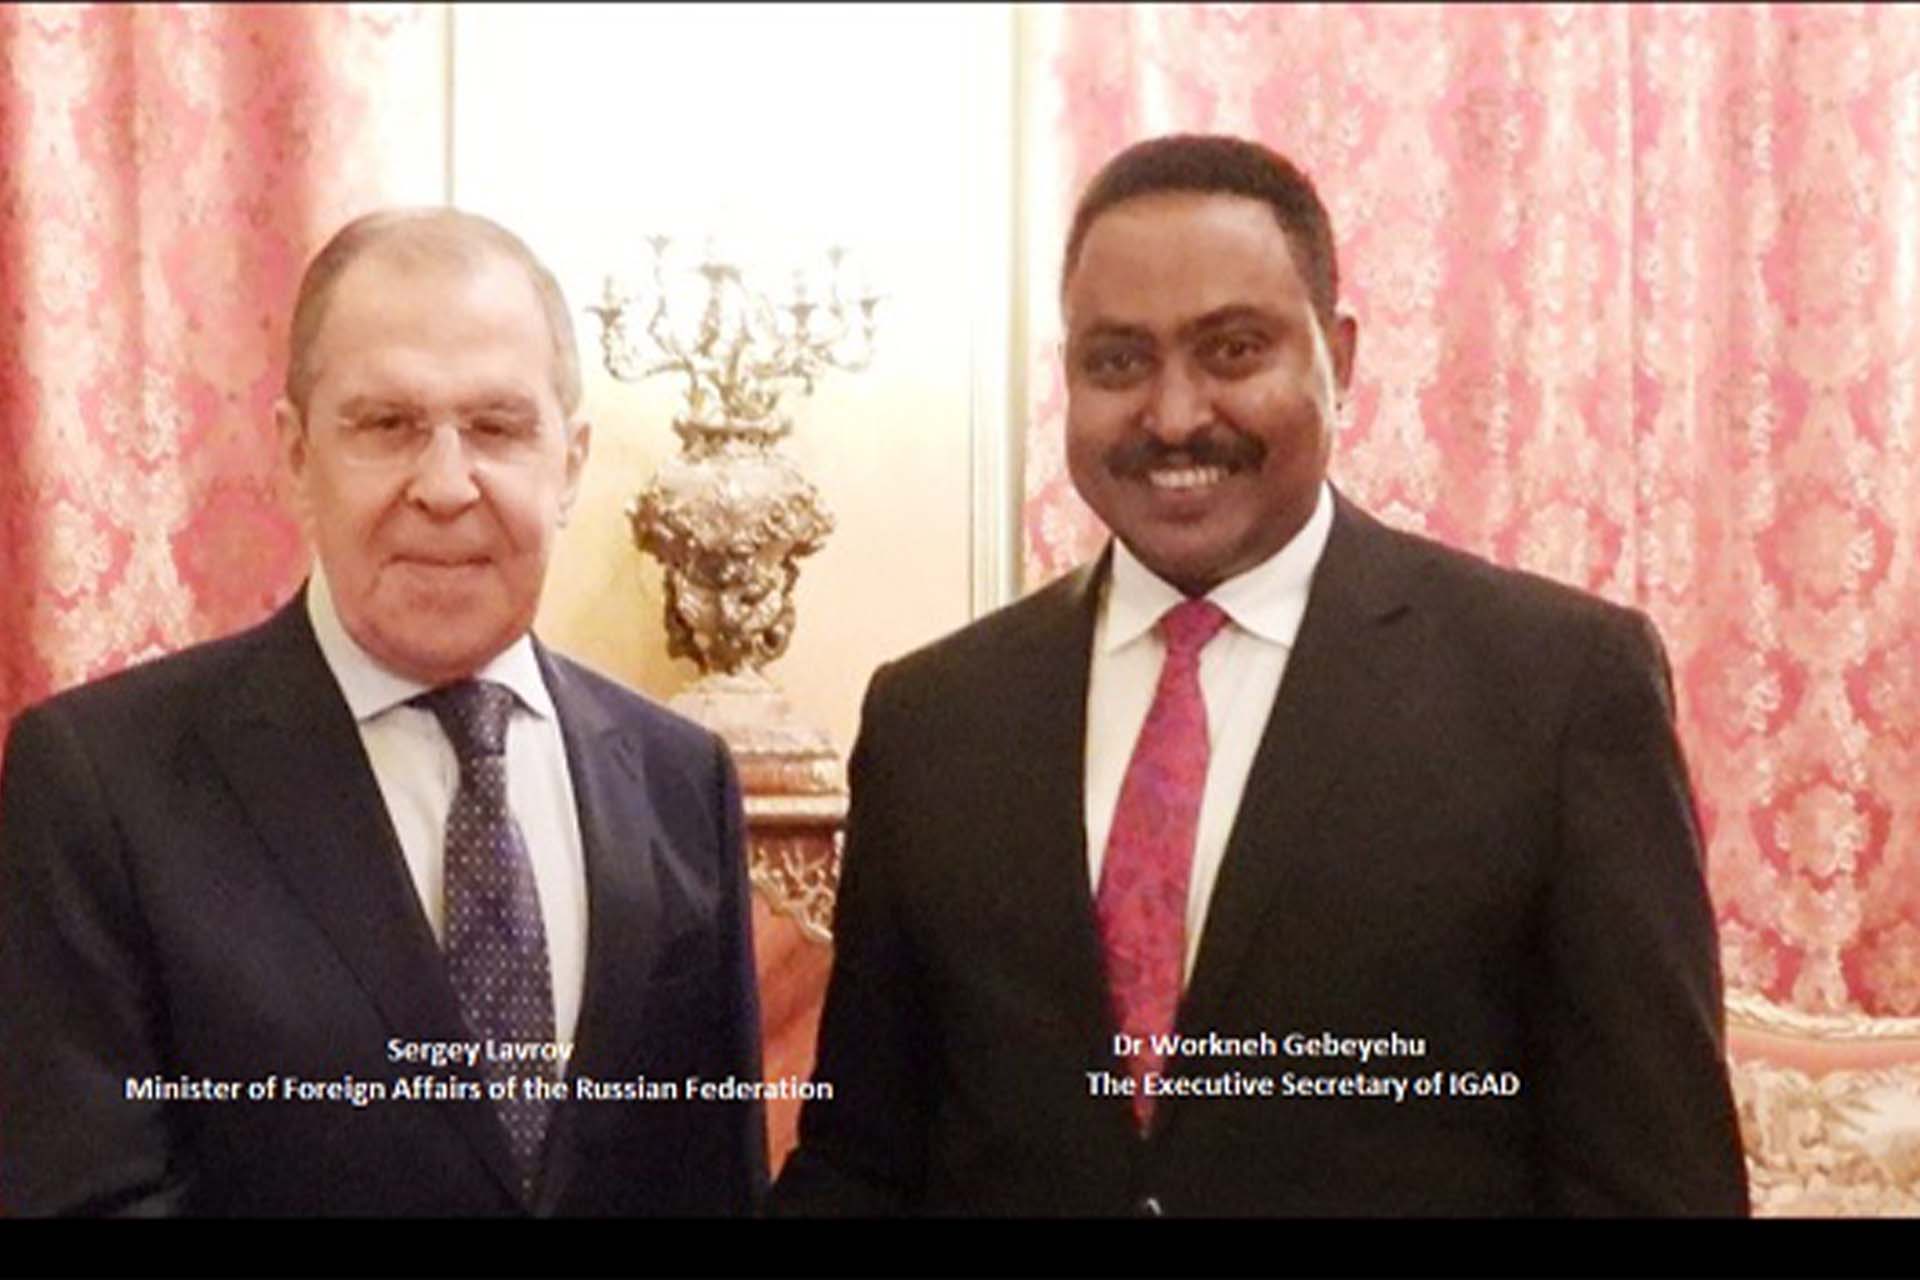 IGAD Executive Secretary Meets Minister Lavrov, Concludes Successful Mission to Moscow